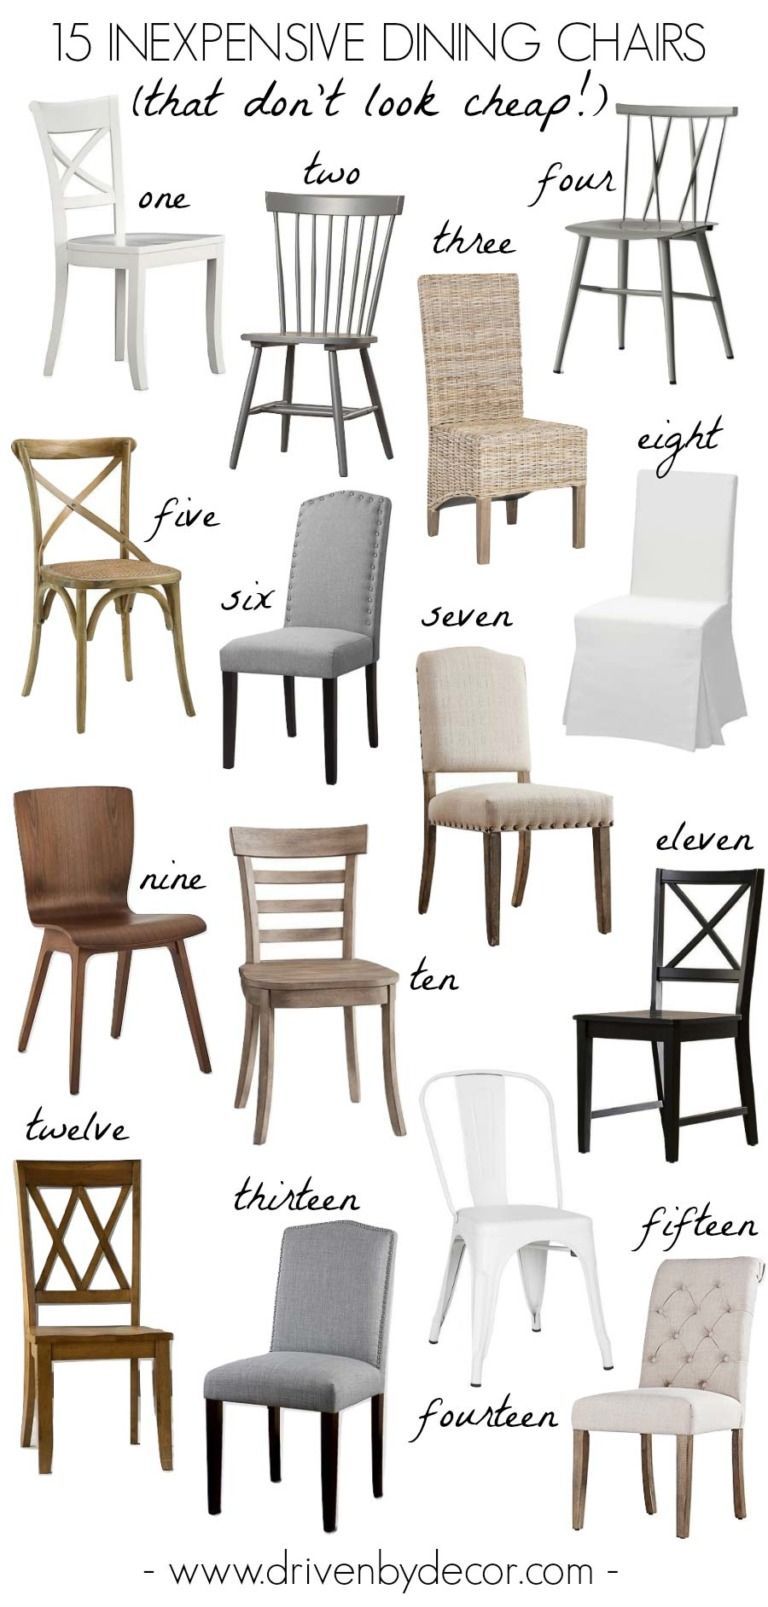 15 Inexpensive Dining Chairs (That Don’t Look Cheap!) – pickndecor.com/design